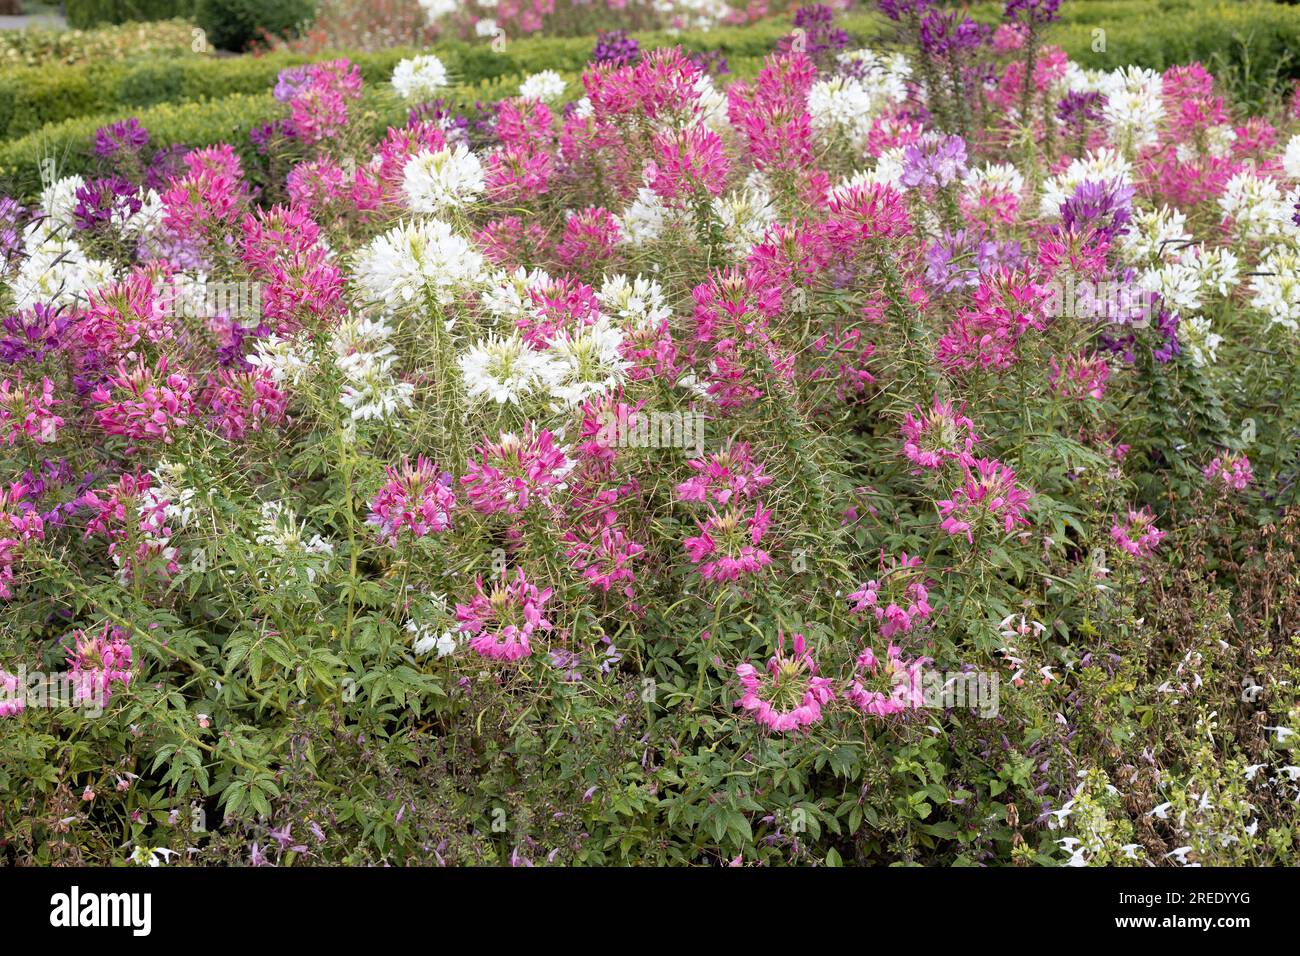 Cleome - spider flowers, in a garden. Stock Photo